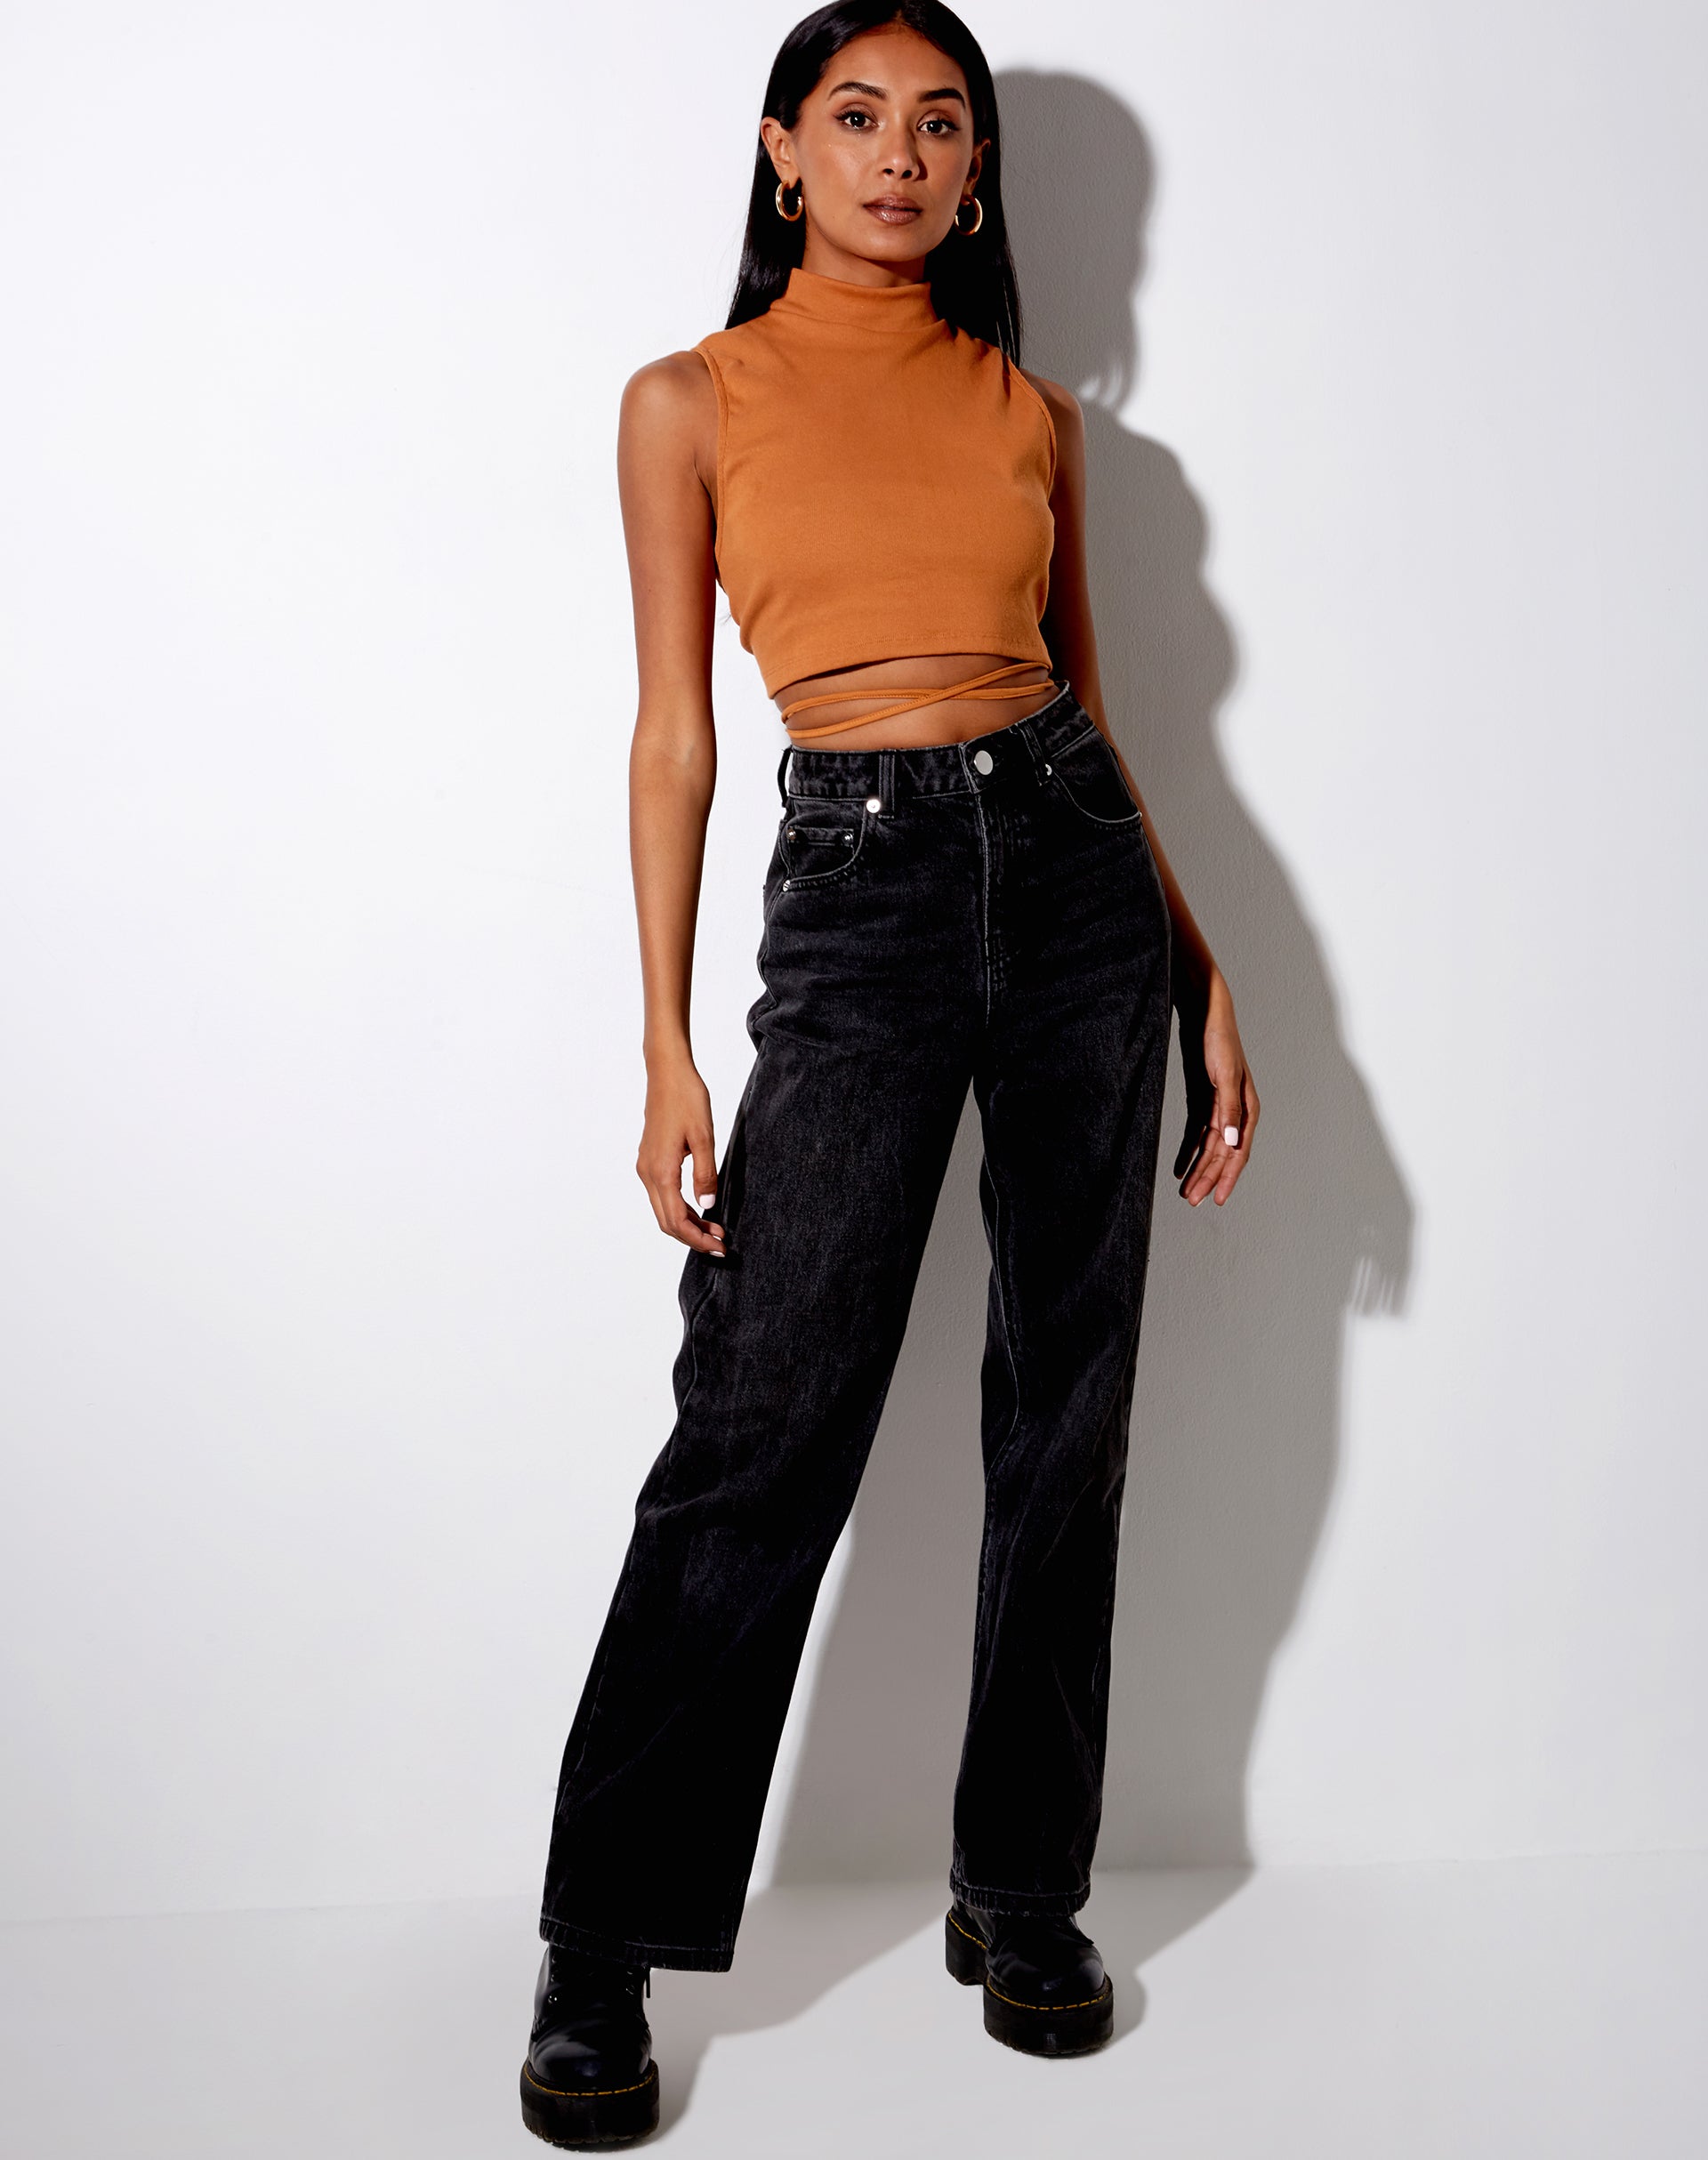 Image of Quera Crop Top in Rib Salted Caramel